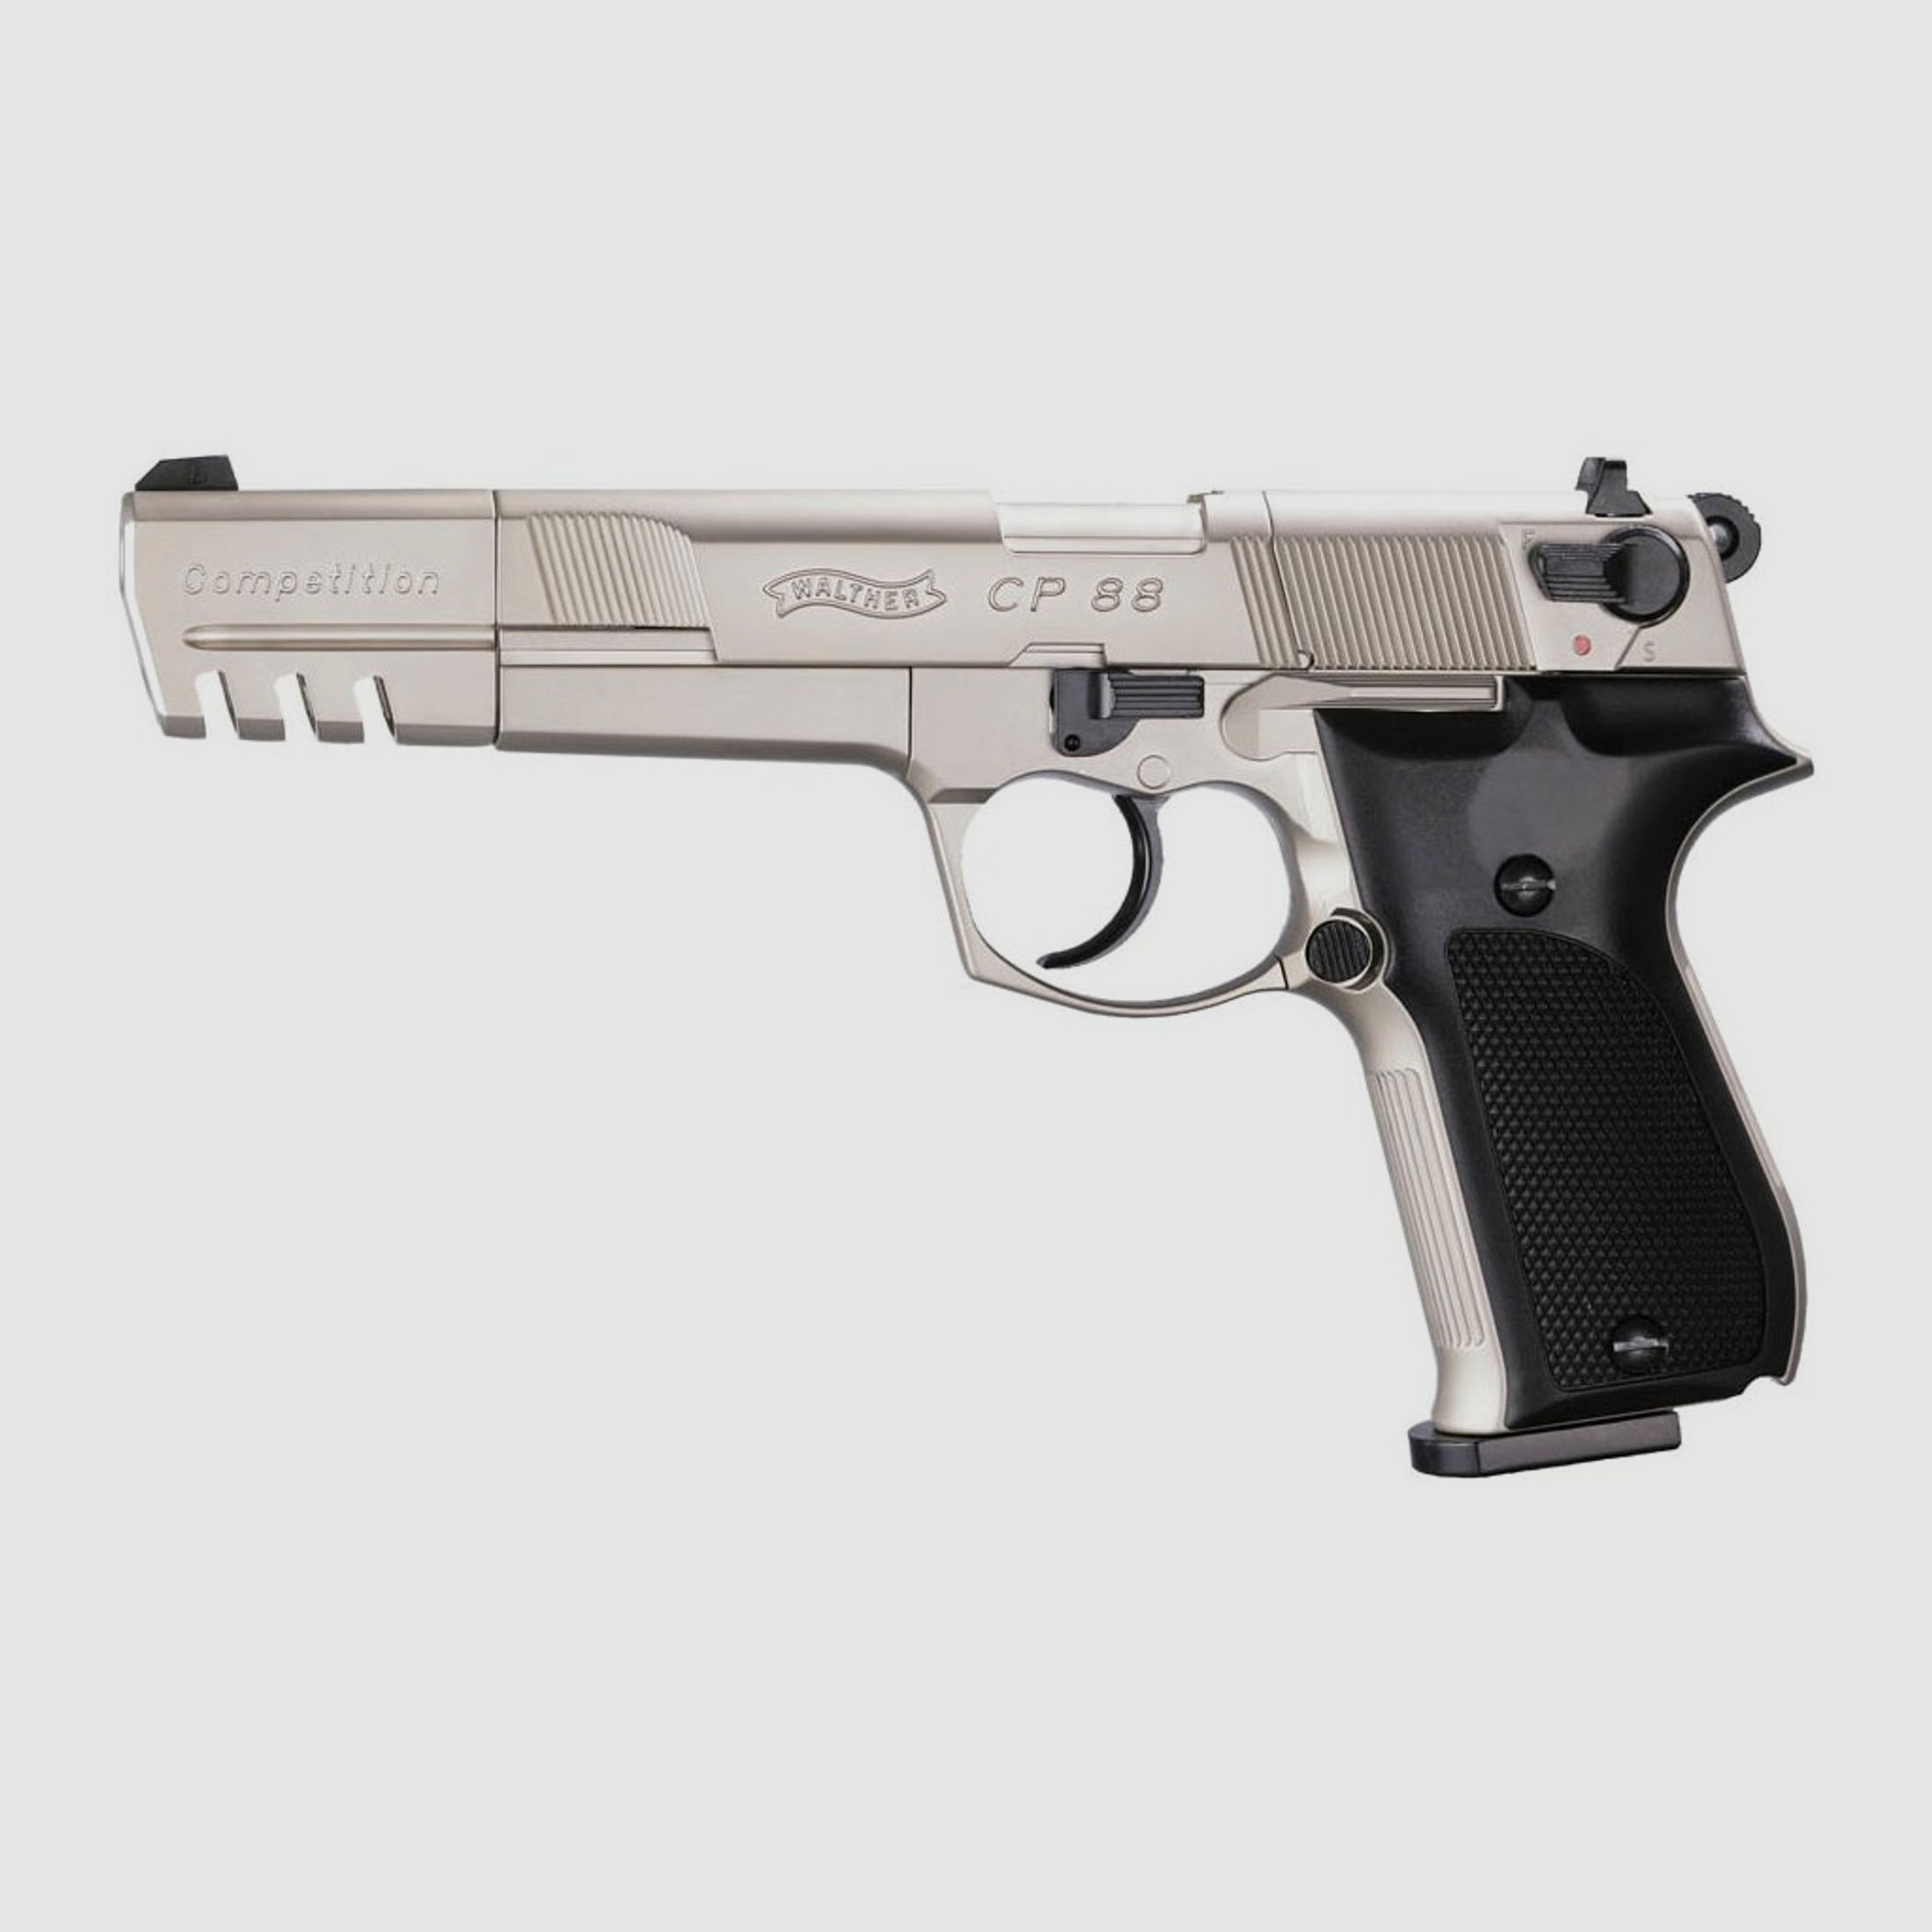 Walther CP88 Competition